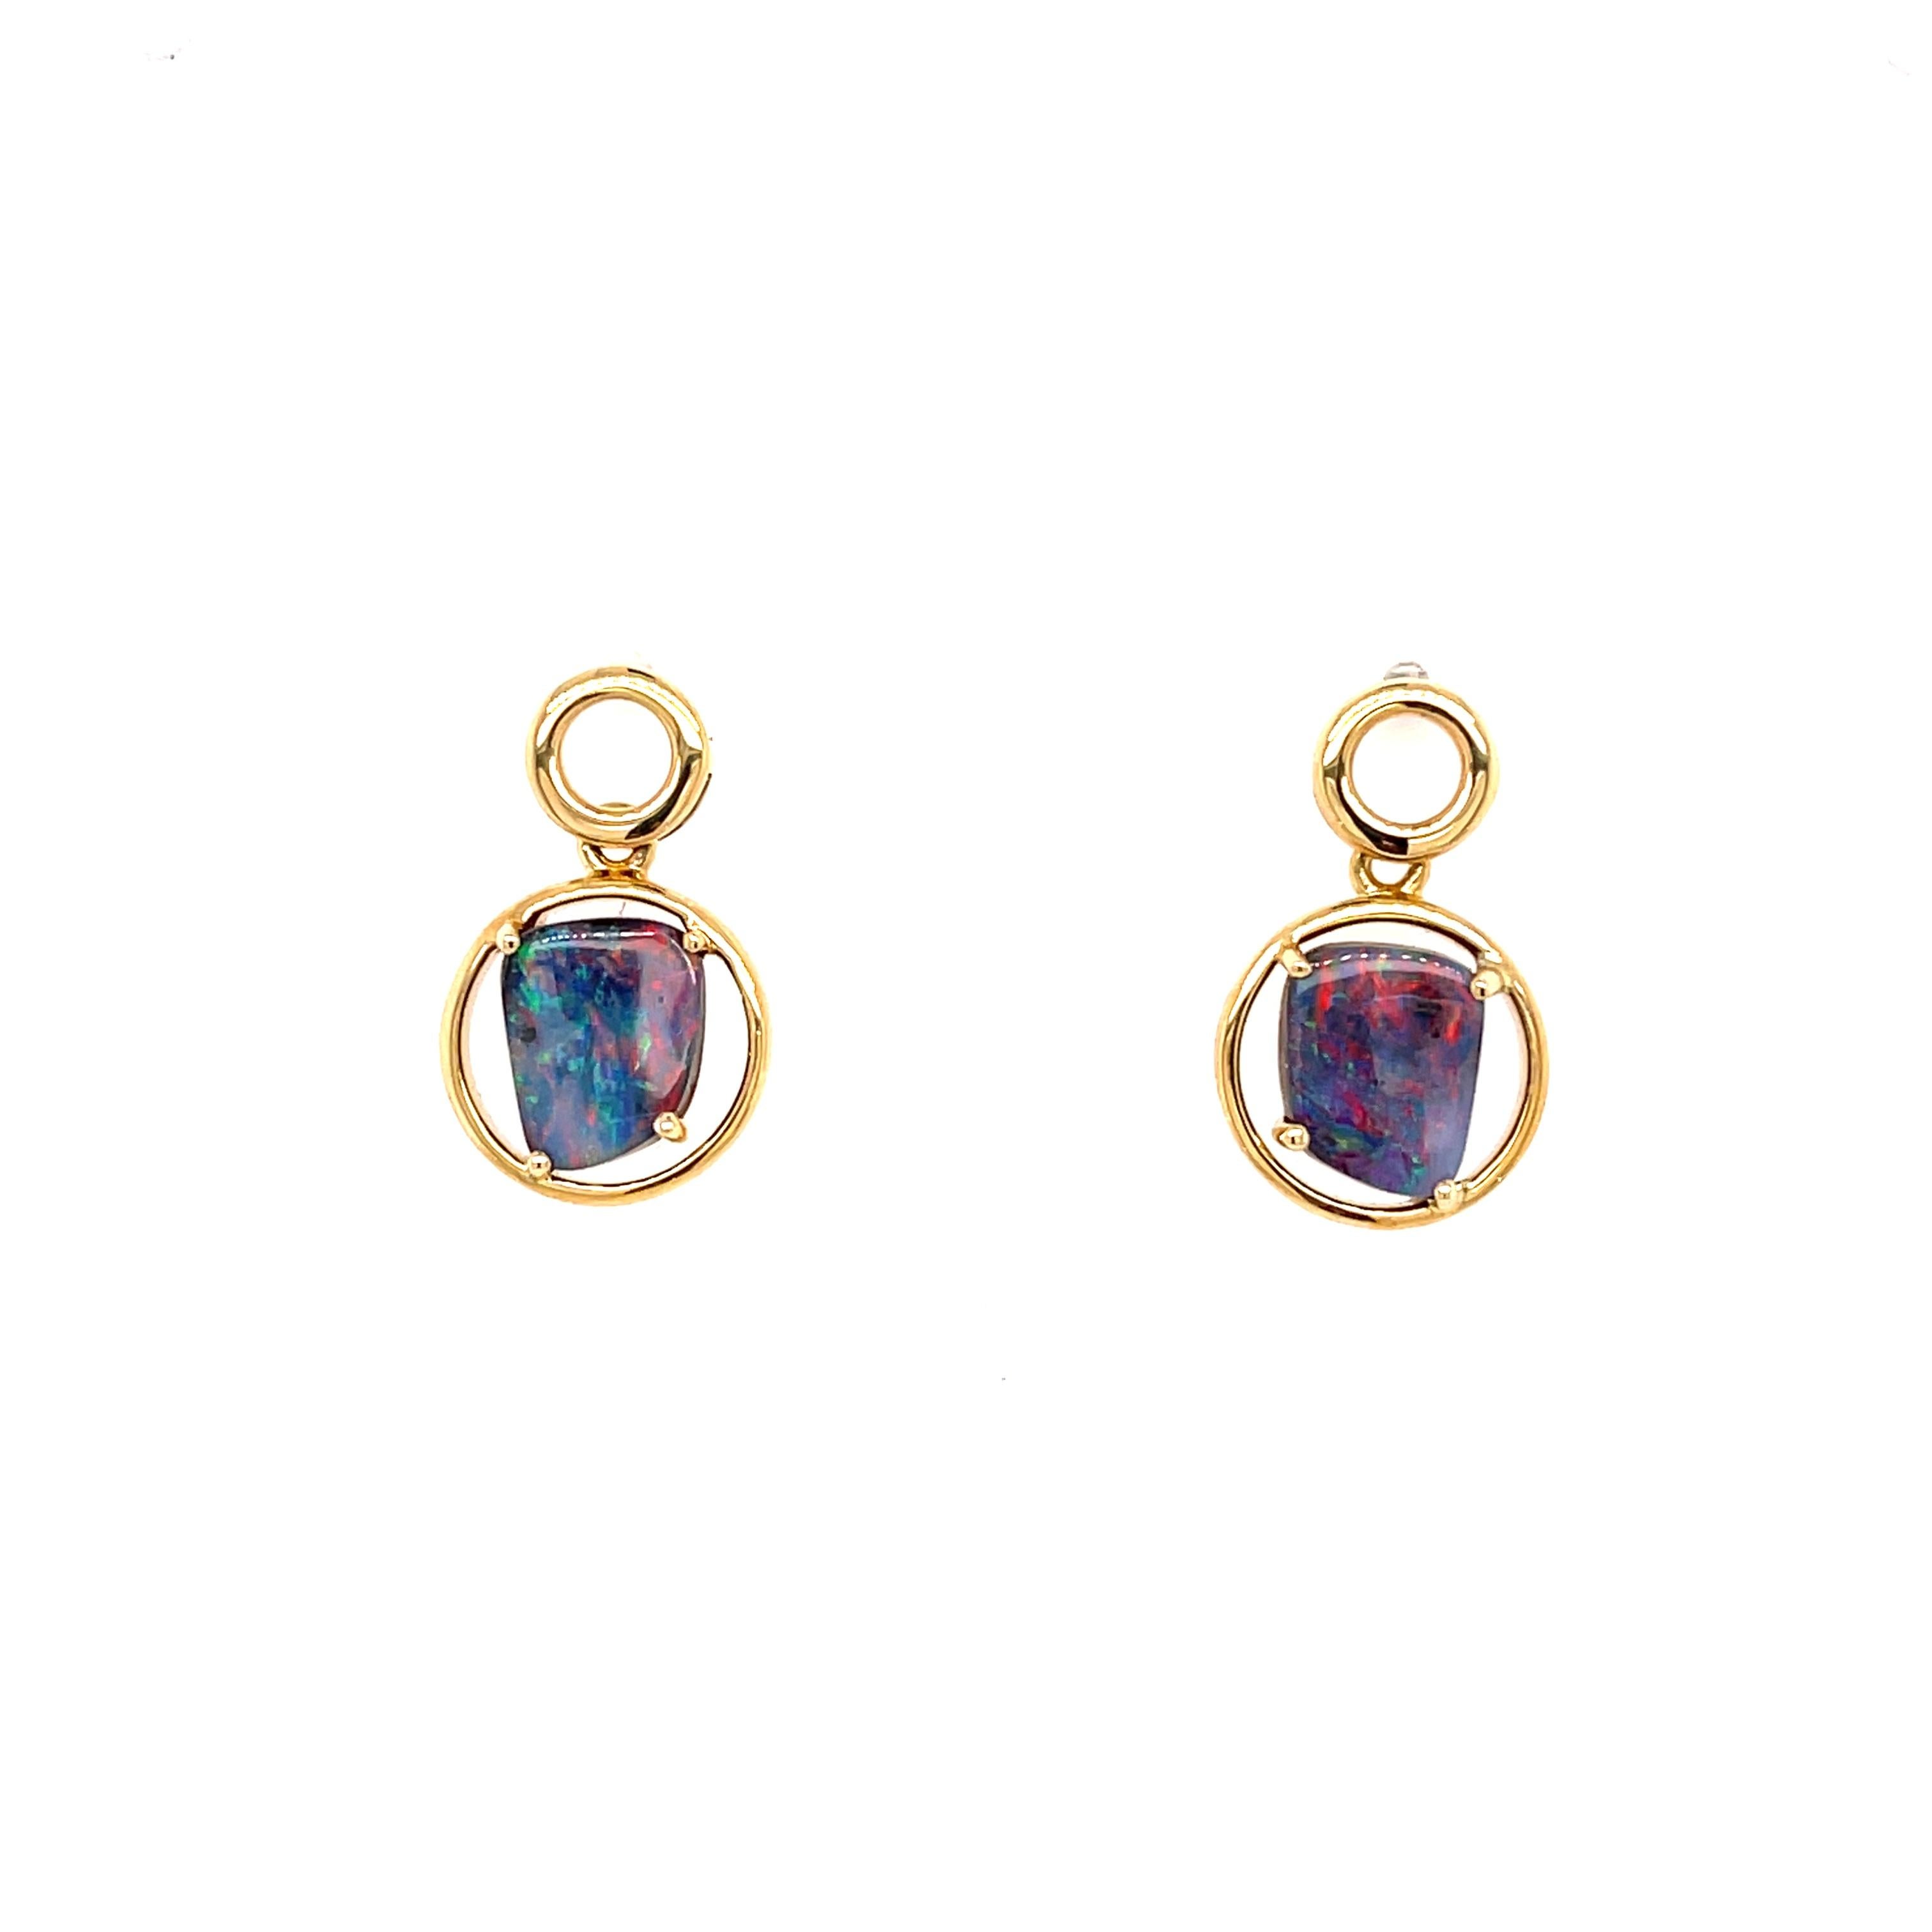 Splendid and utterly elegant is the wearer of the 'Bella Donna' boulder opal (2.90ct) earrings. The magnificent deep hues of red and blue of the precious opal gemstone in combination with the stunningly simple but classic 18K yellow gold setting is